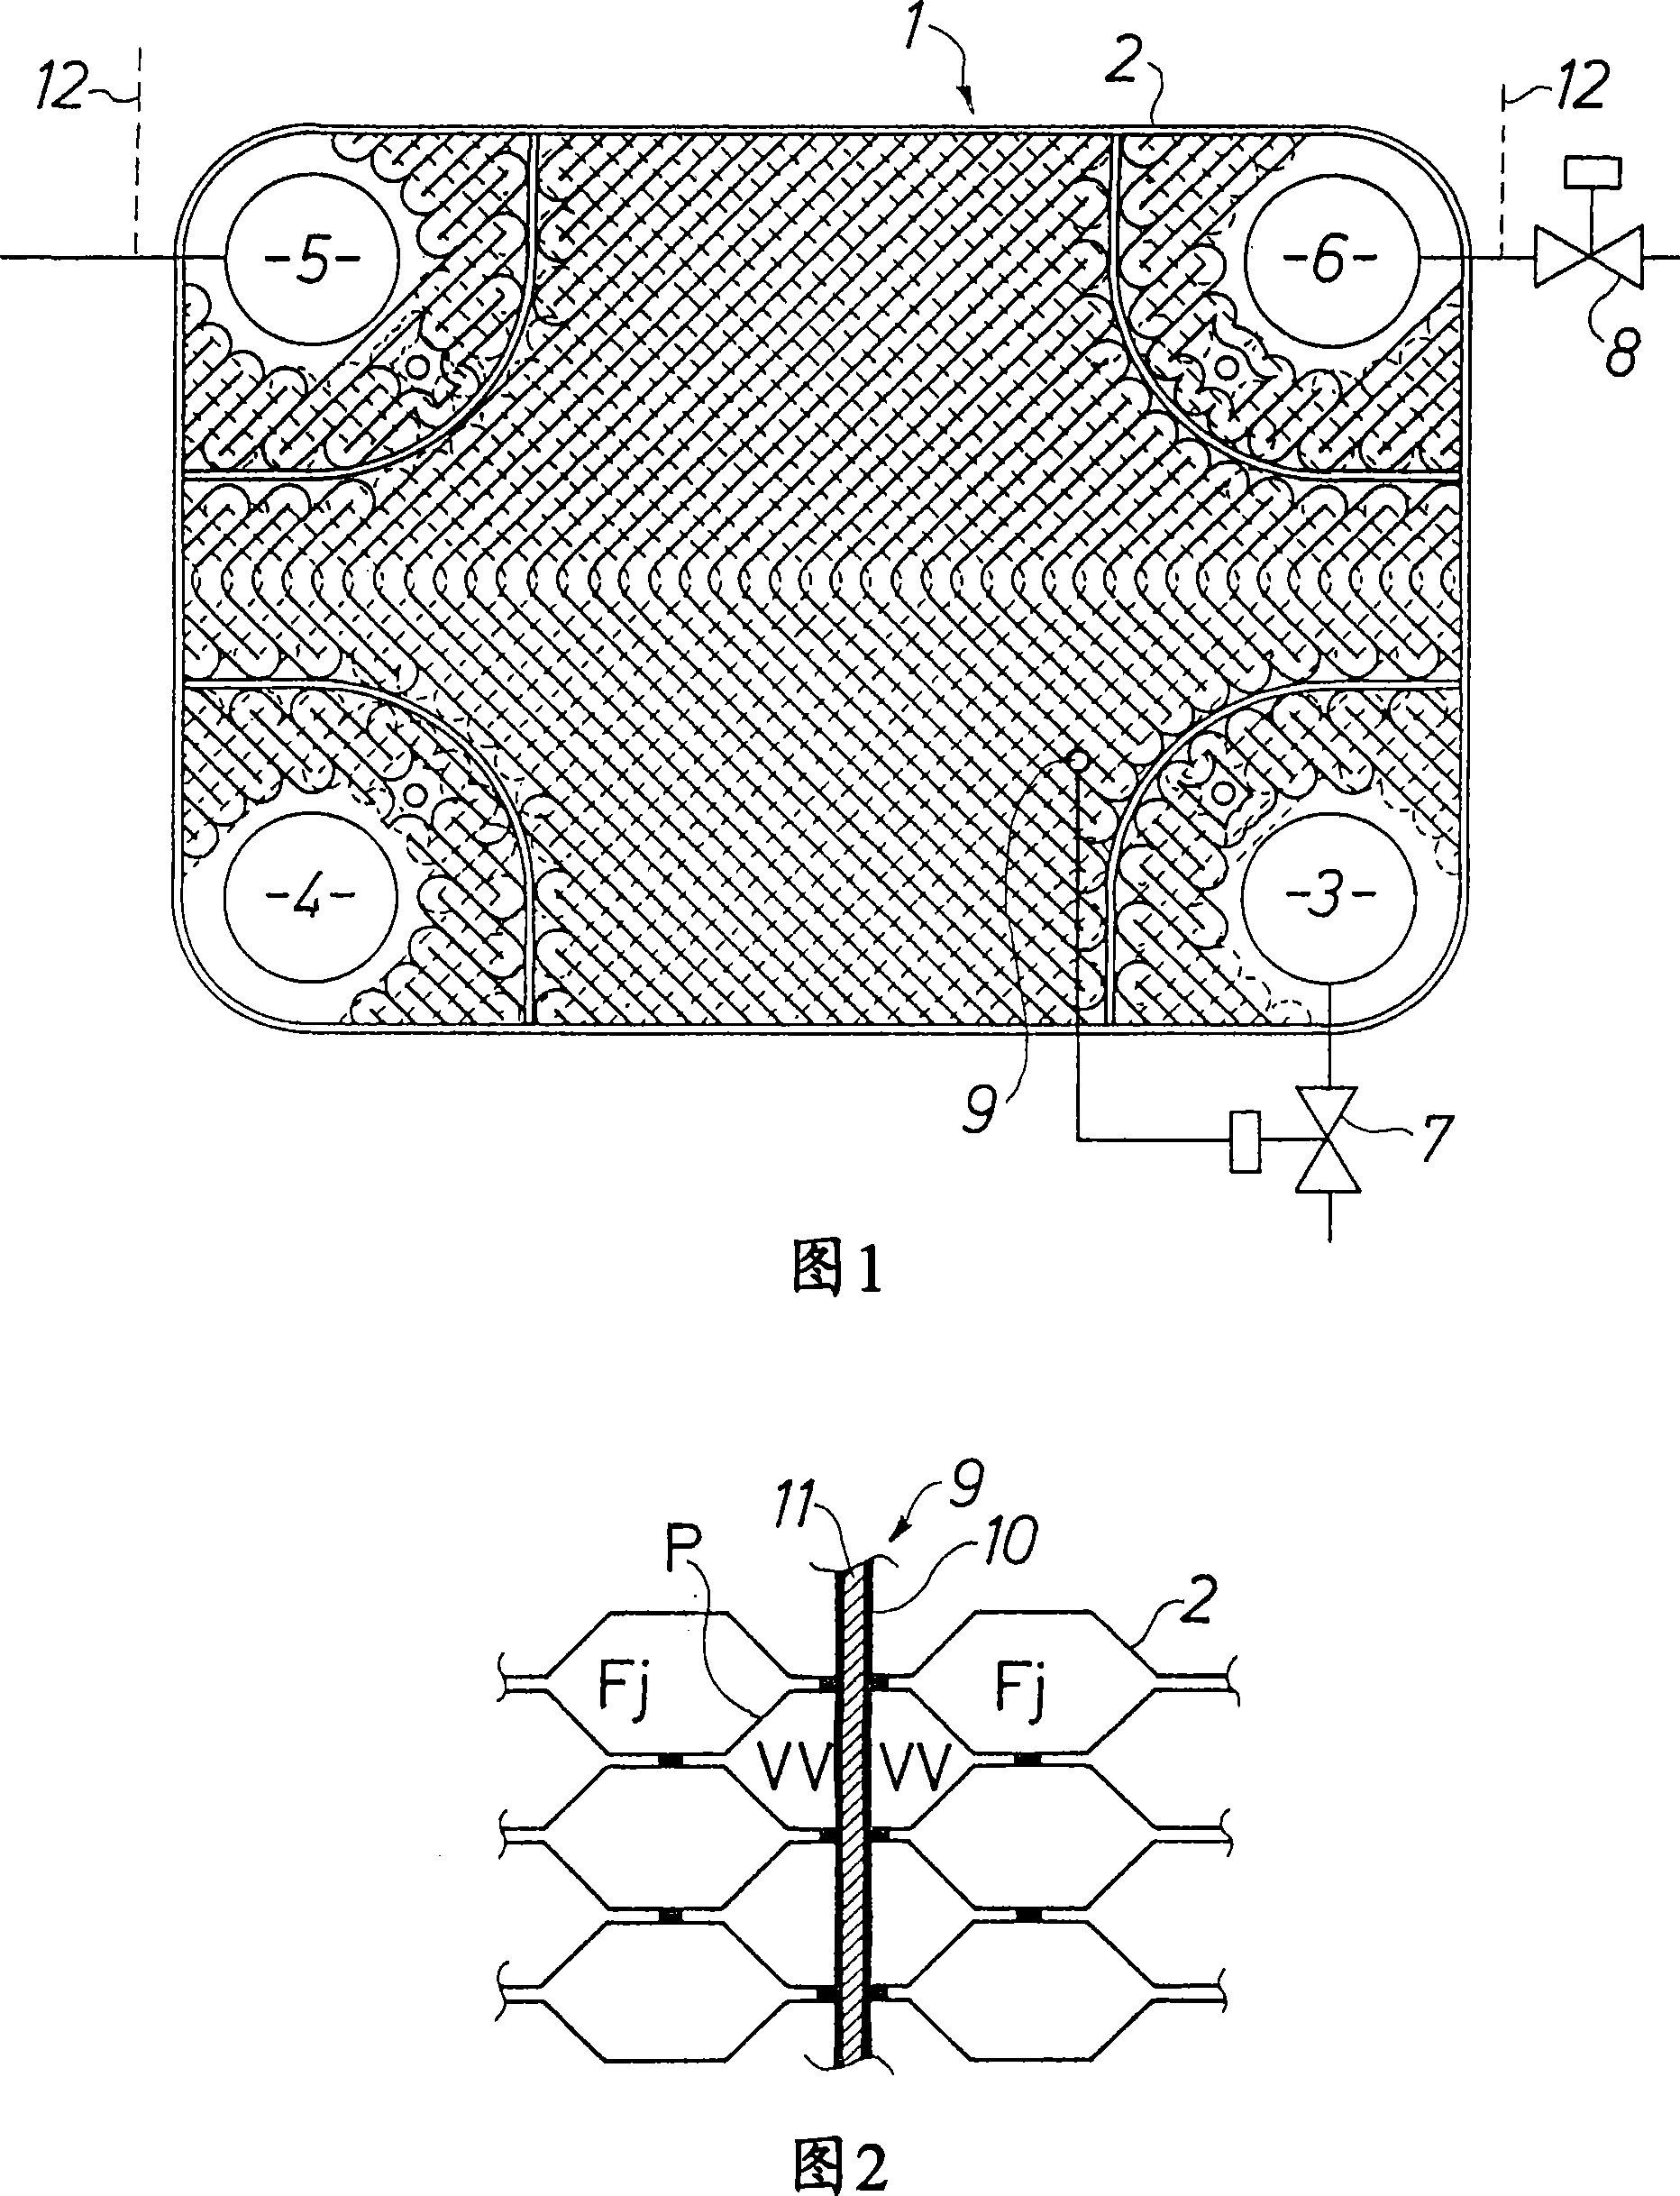 Heat exchanger with temperature-controlled valve